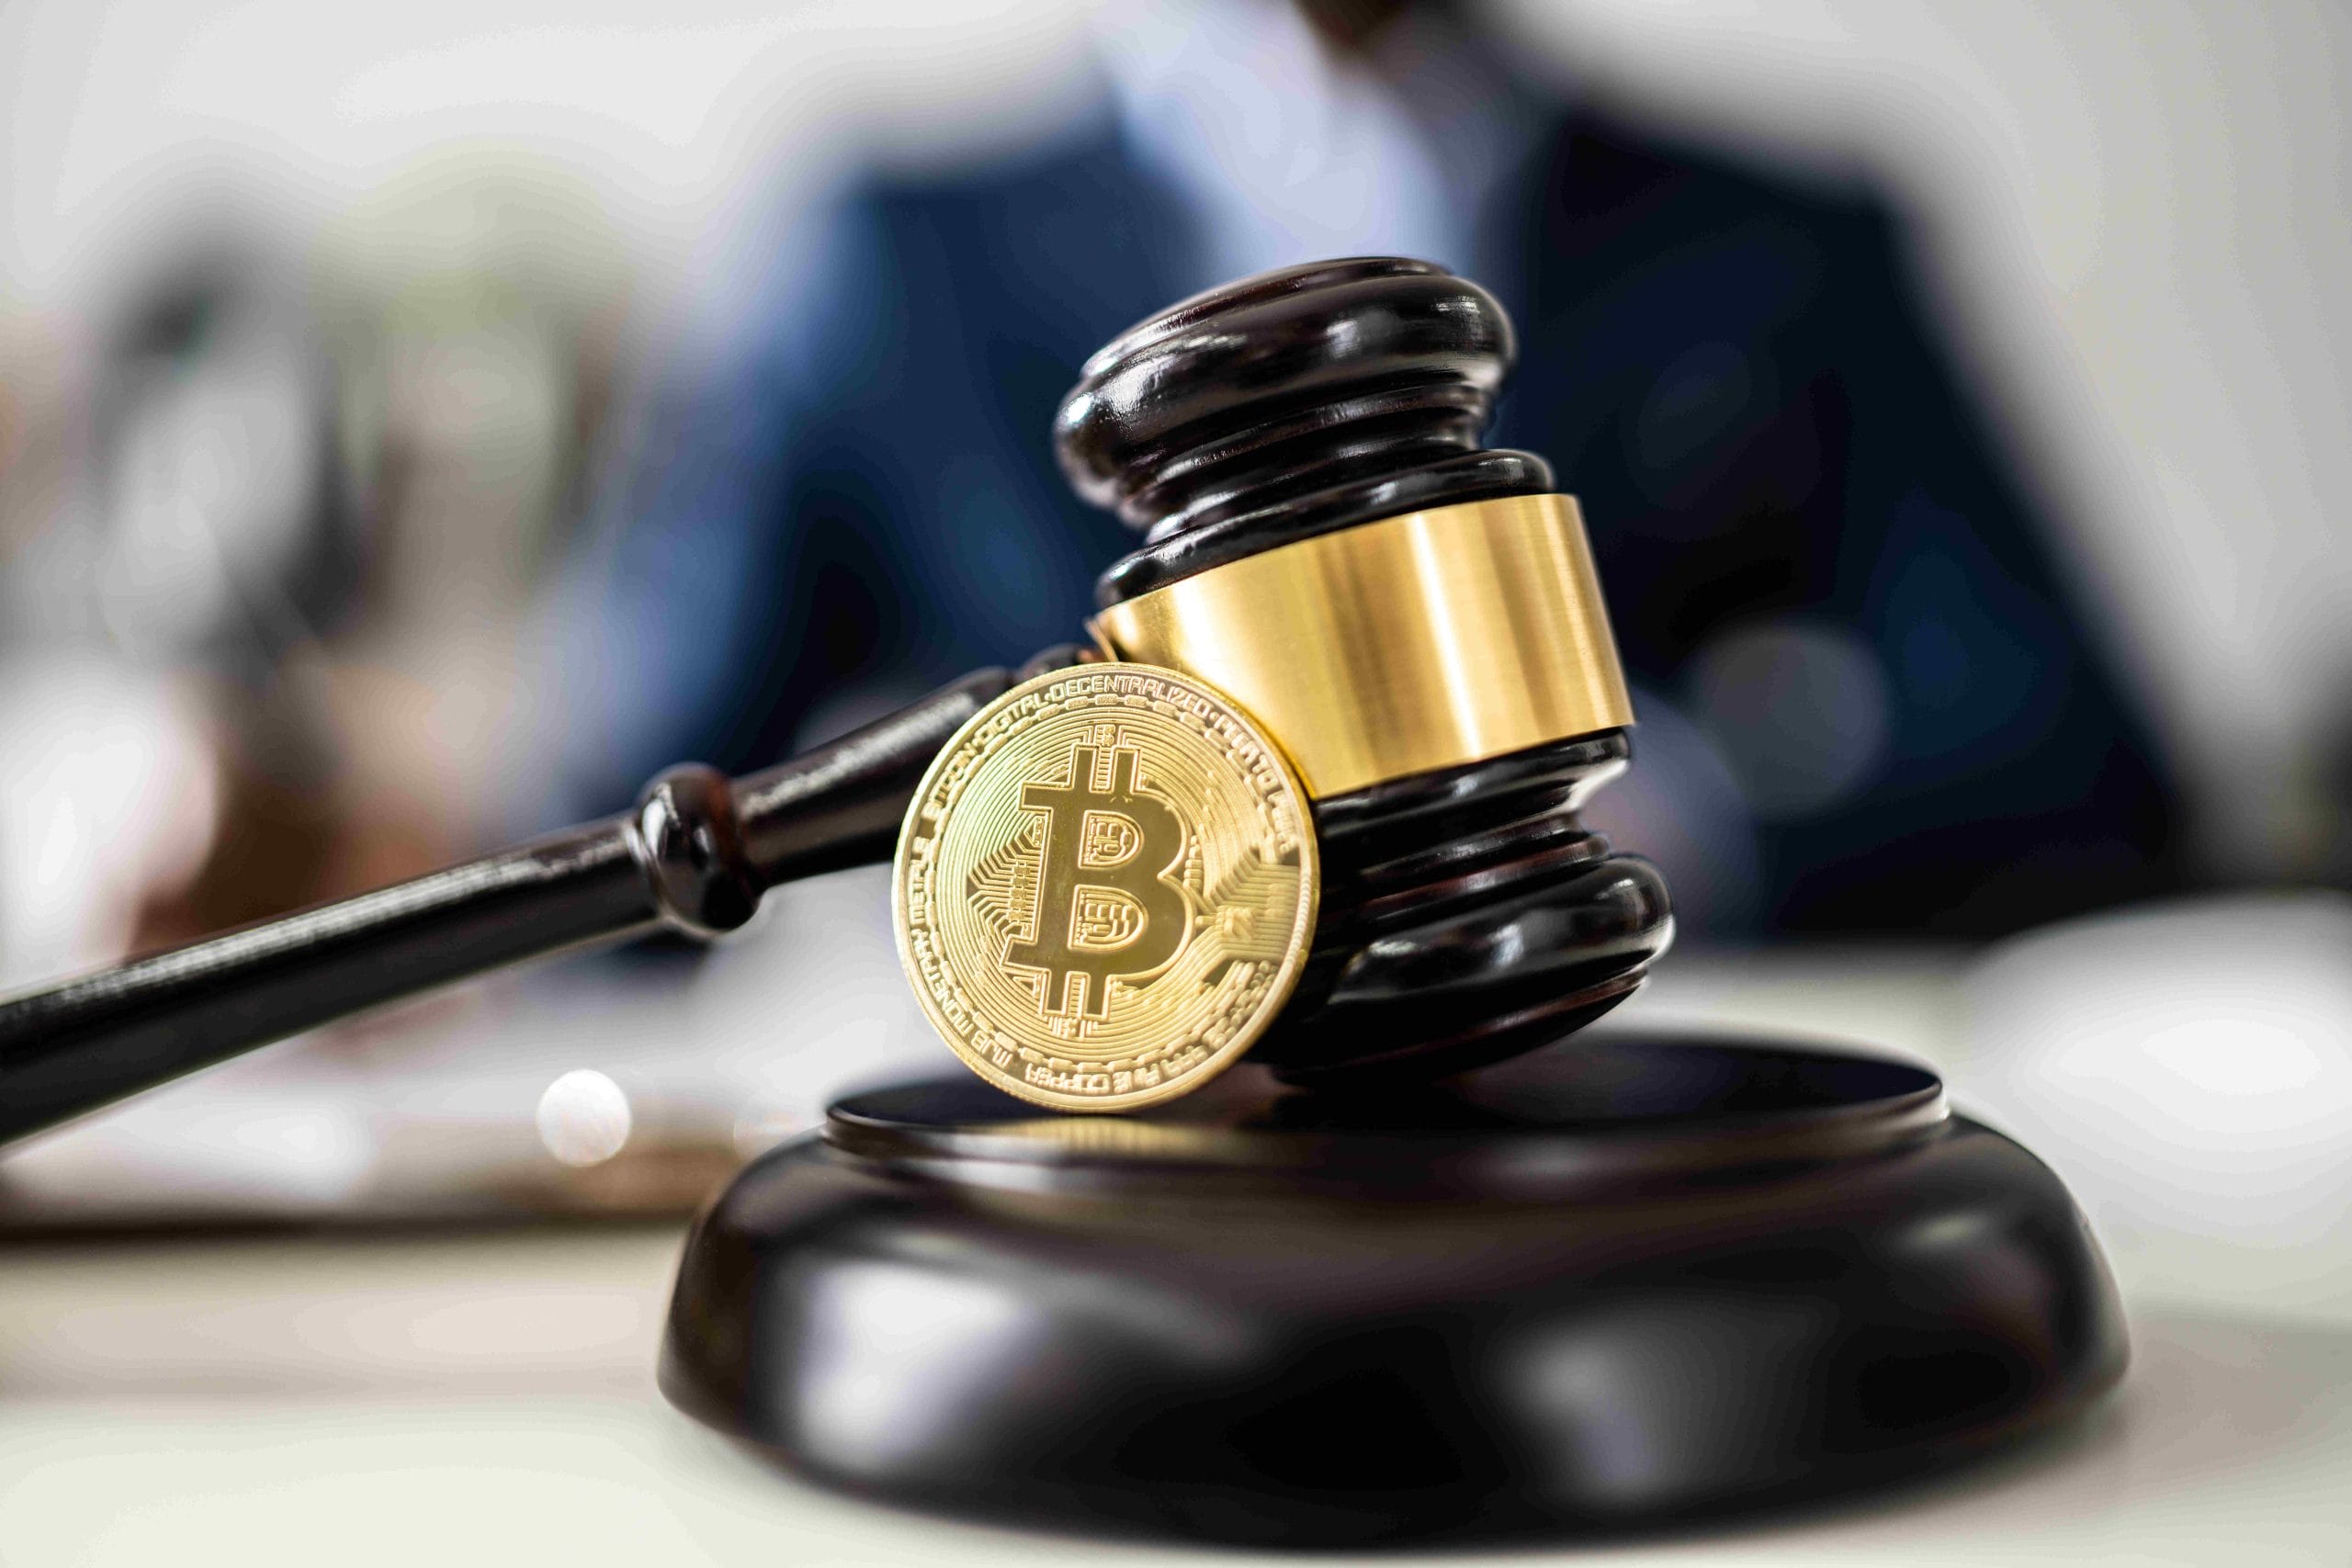 A Bitcoin cryptocurrency coin symbolically placed on a wooden judge's gavel, representing Coinbase's case against the SEC in a legal setting.